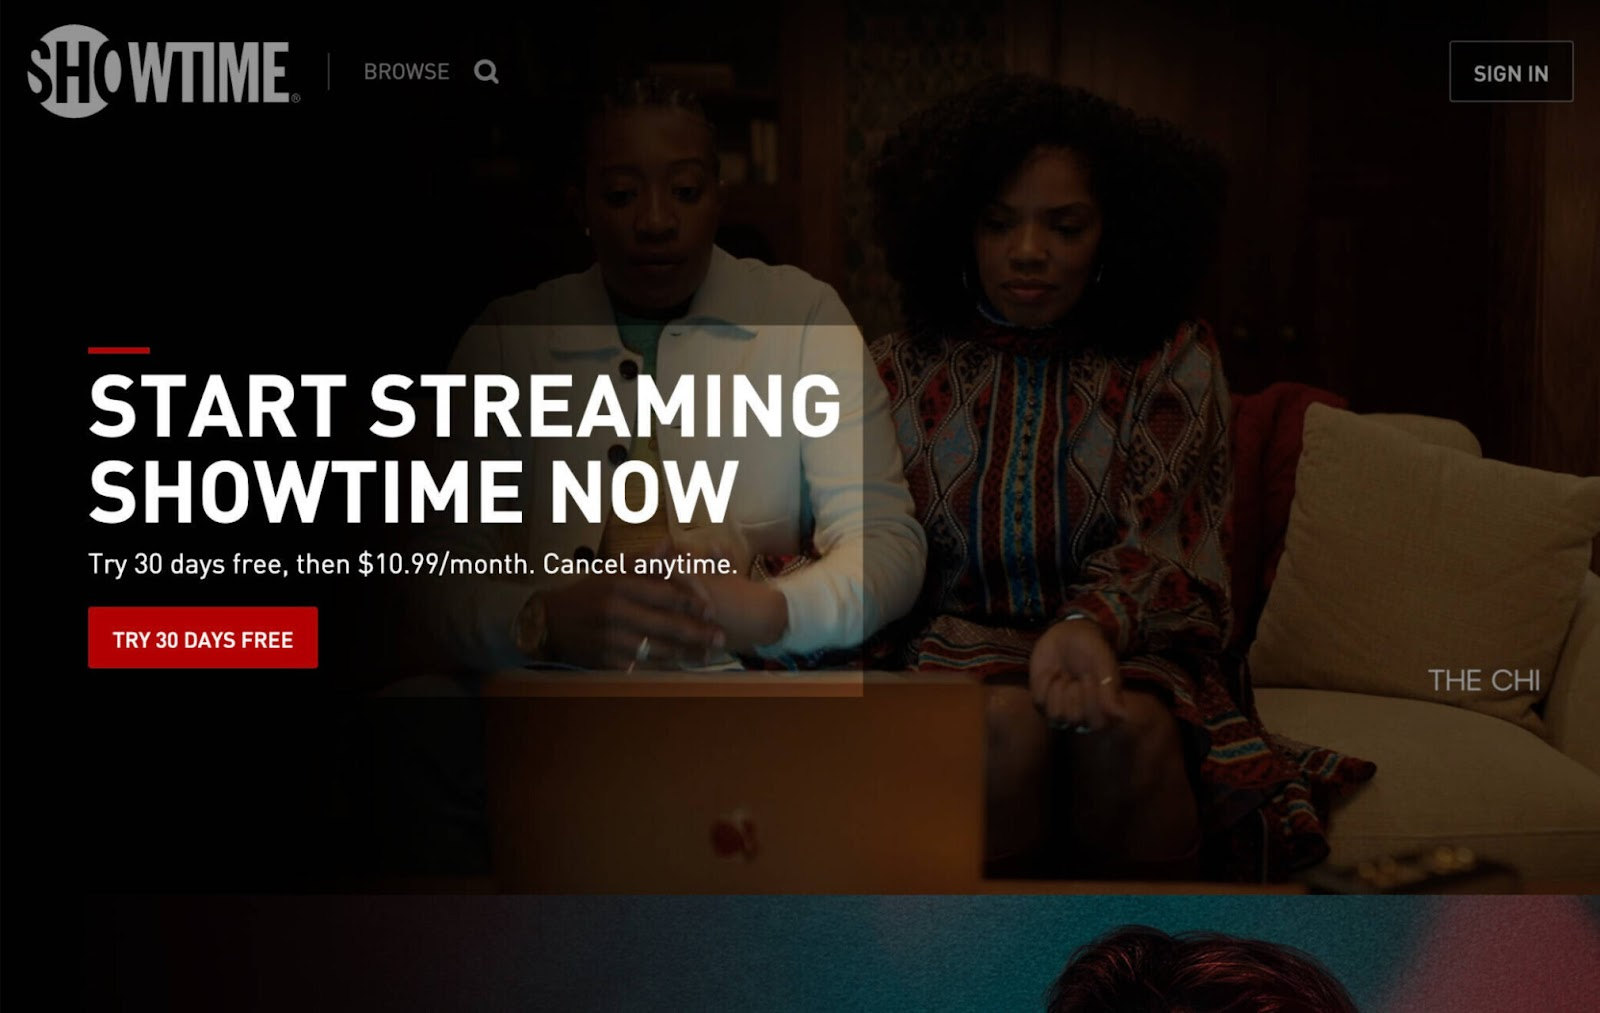 Show time's landing page with the headline: "Start Streaming Showtime Now"